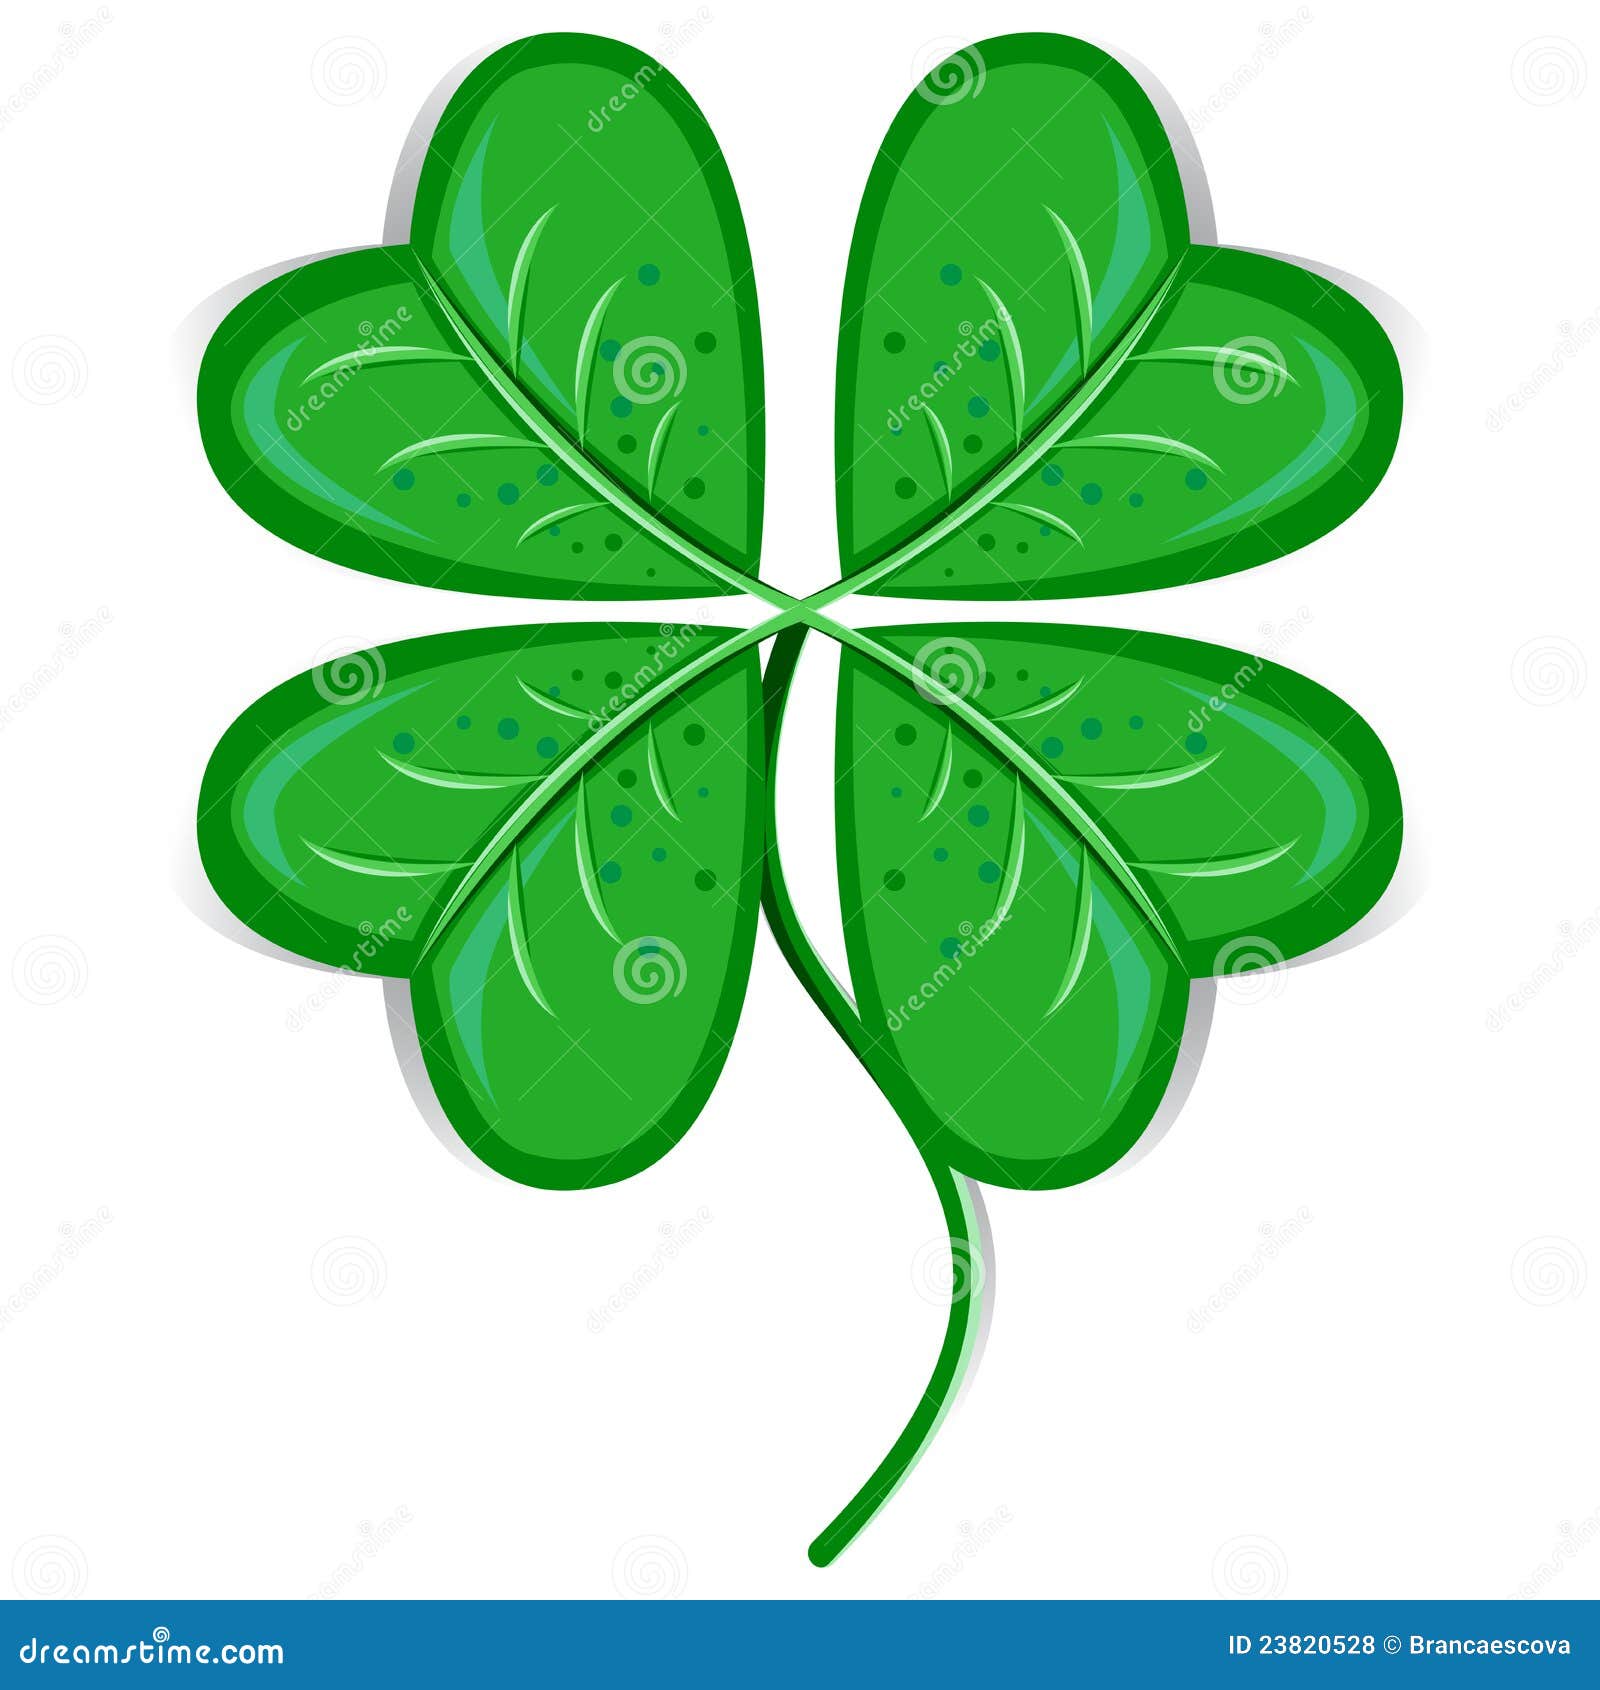 royalty free stock photos clover leaf image